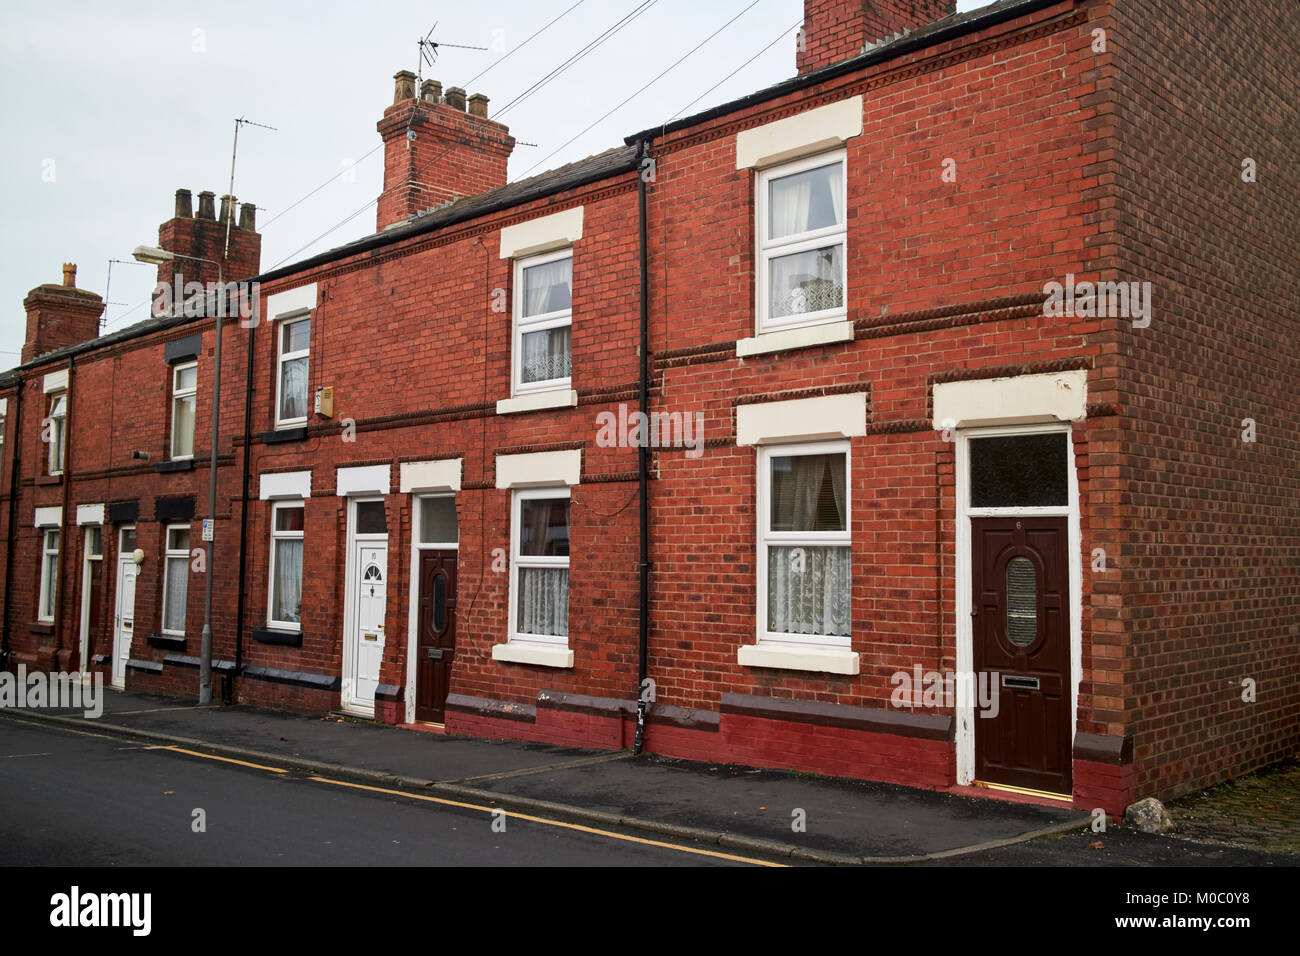 two bedroomed red brick victorian terraced houses ward street st helens merseyside uk Stock Photo